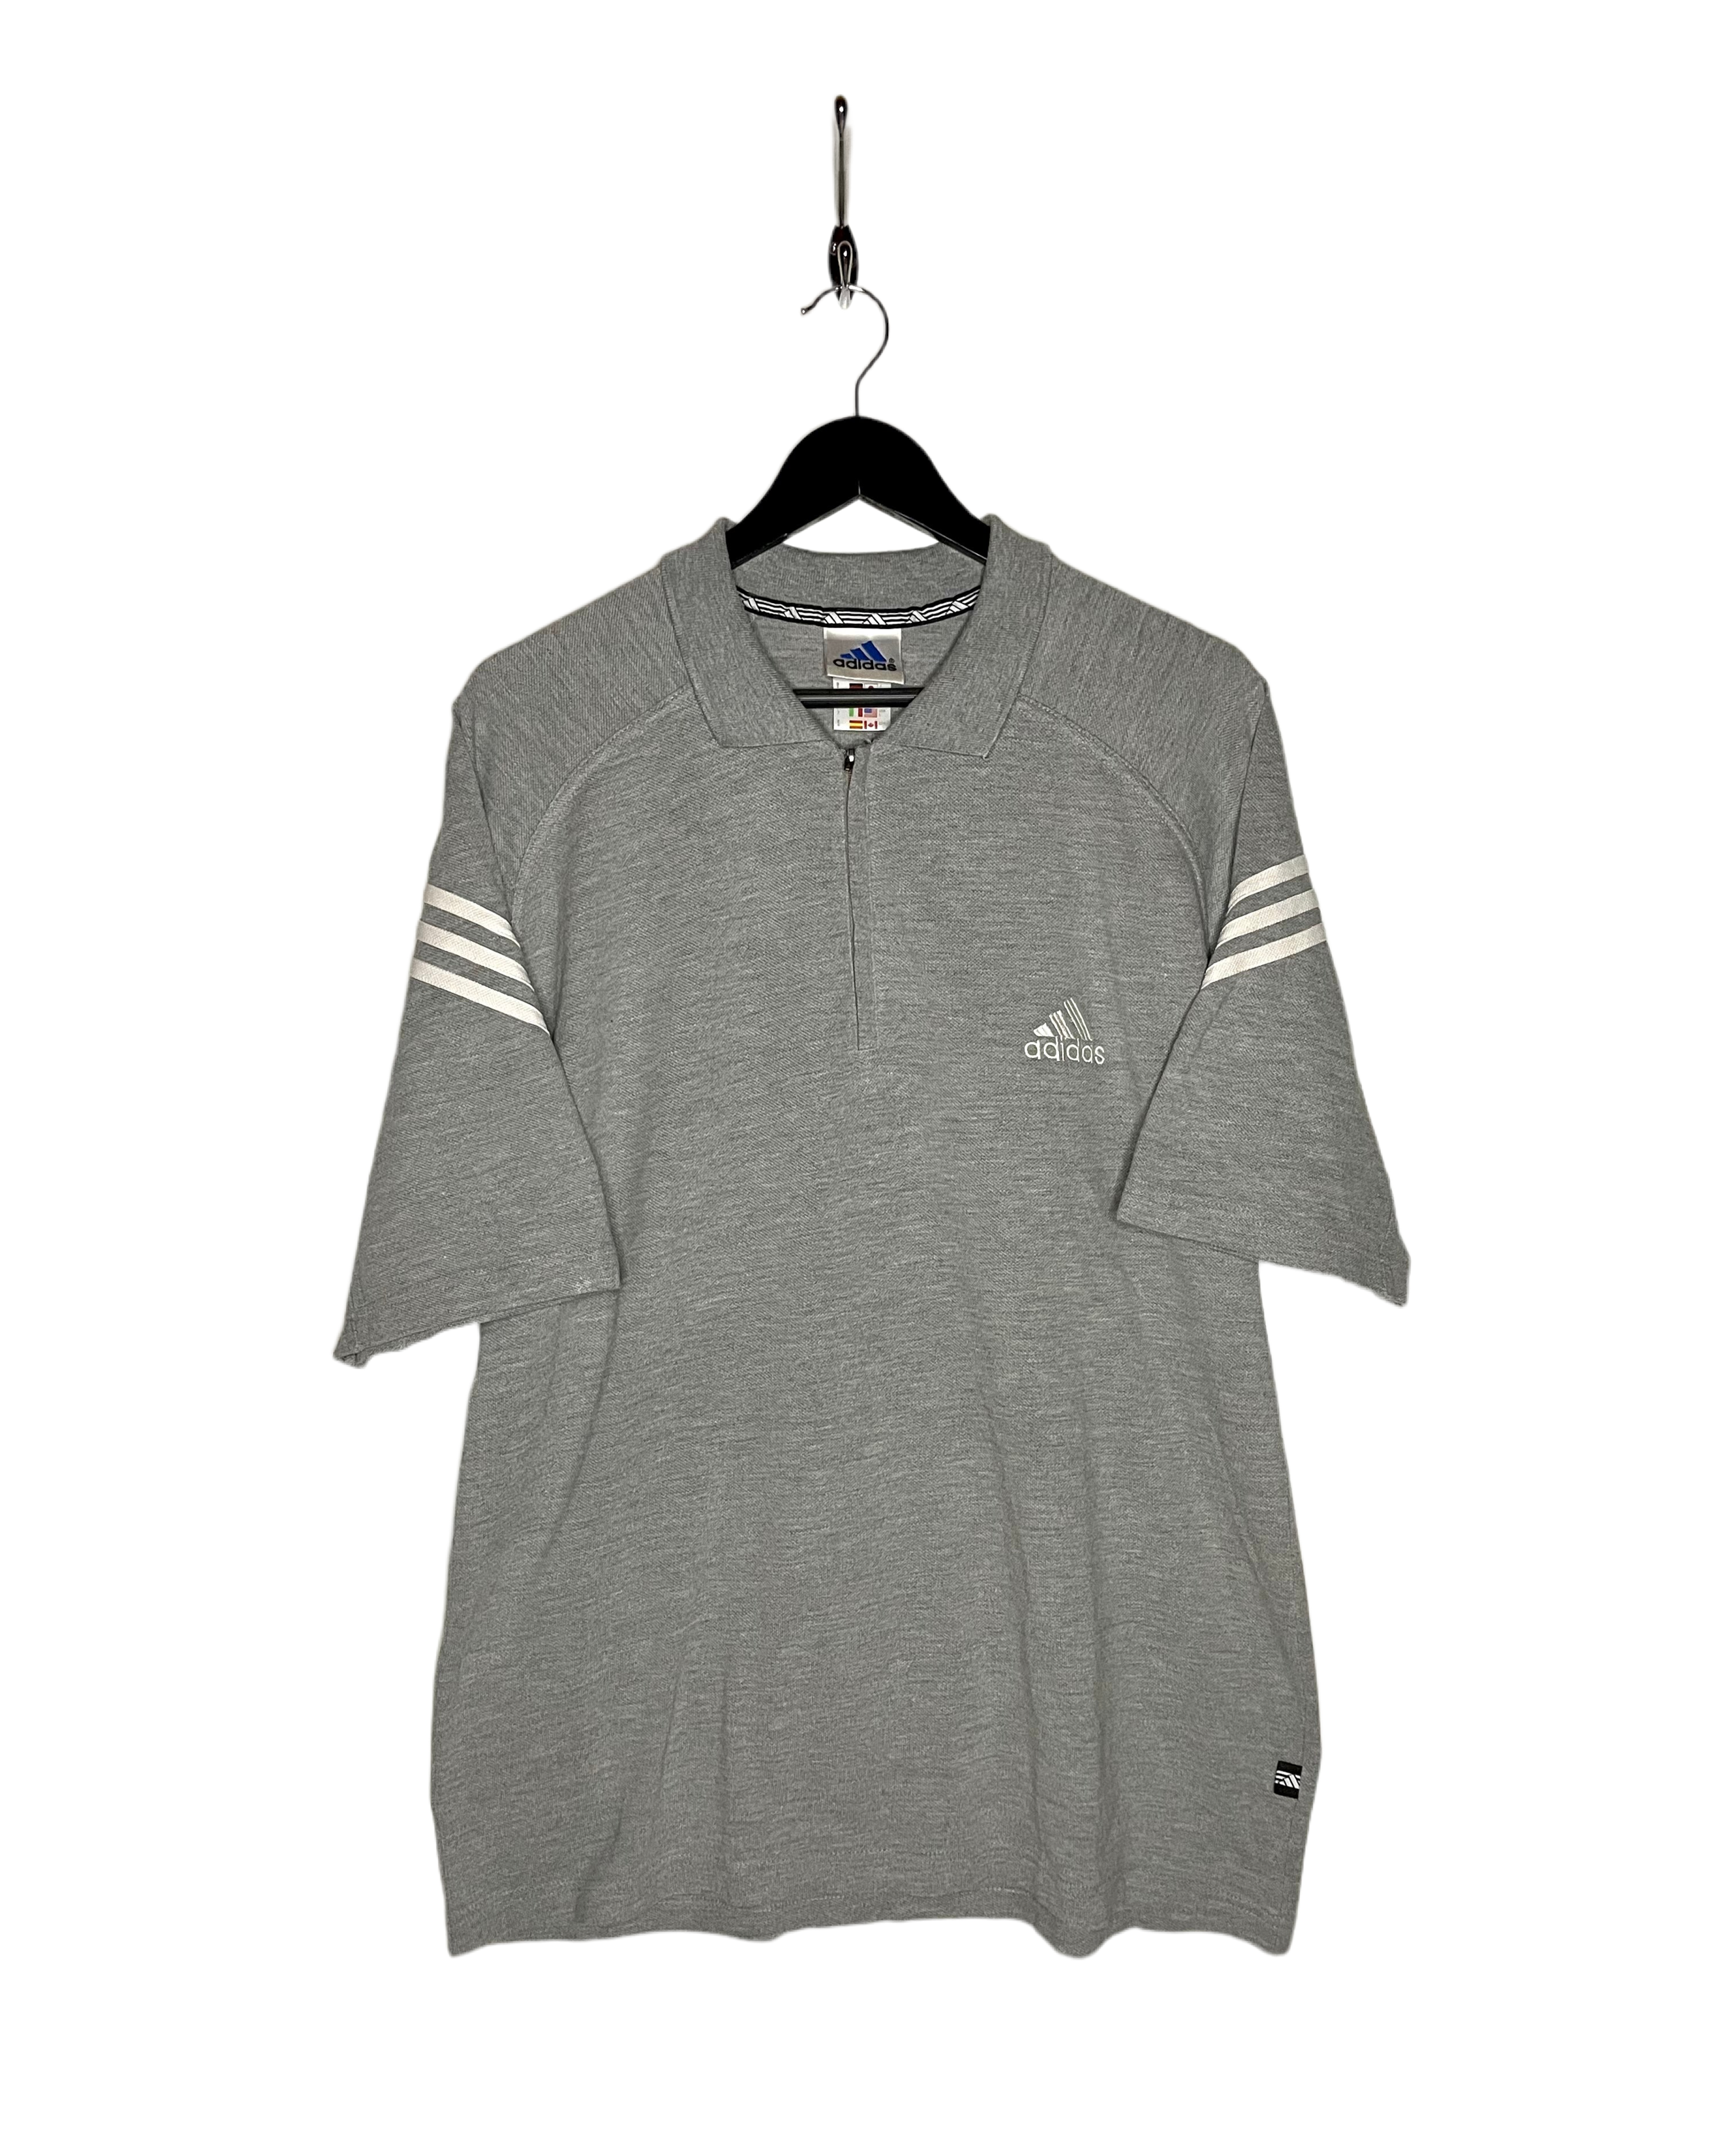 Adidas vintage polo shirt with zipper gray size L 